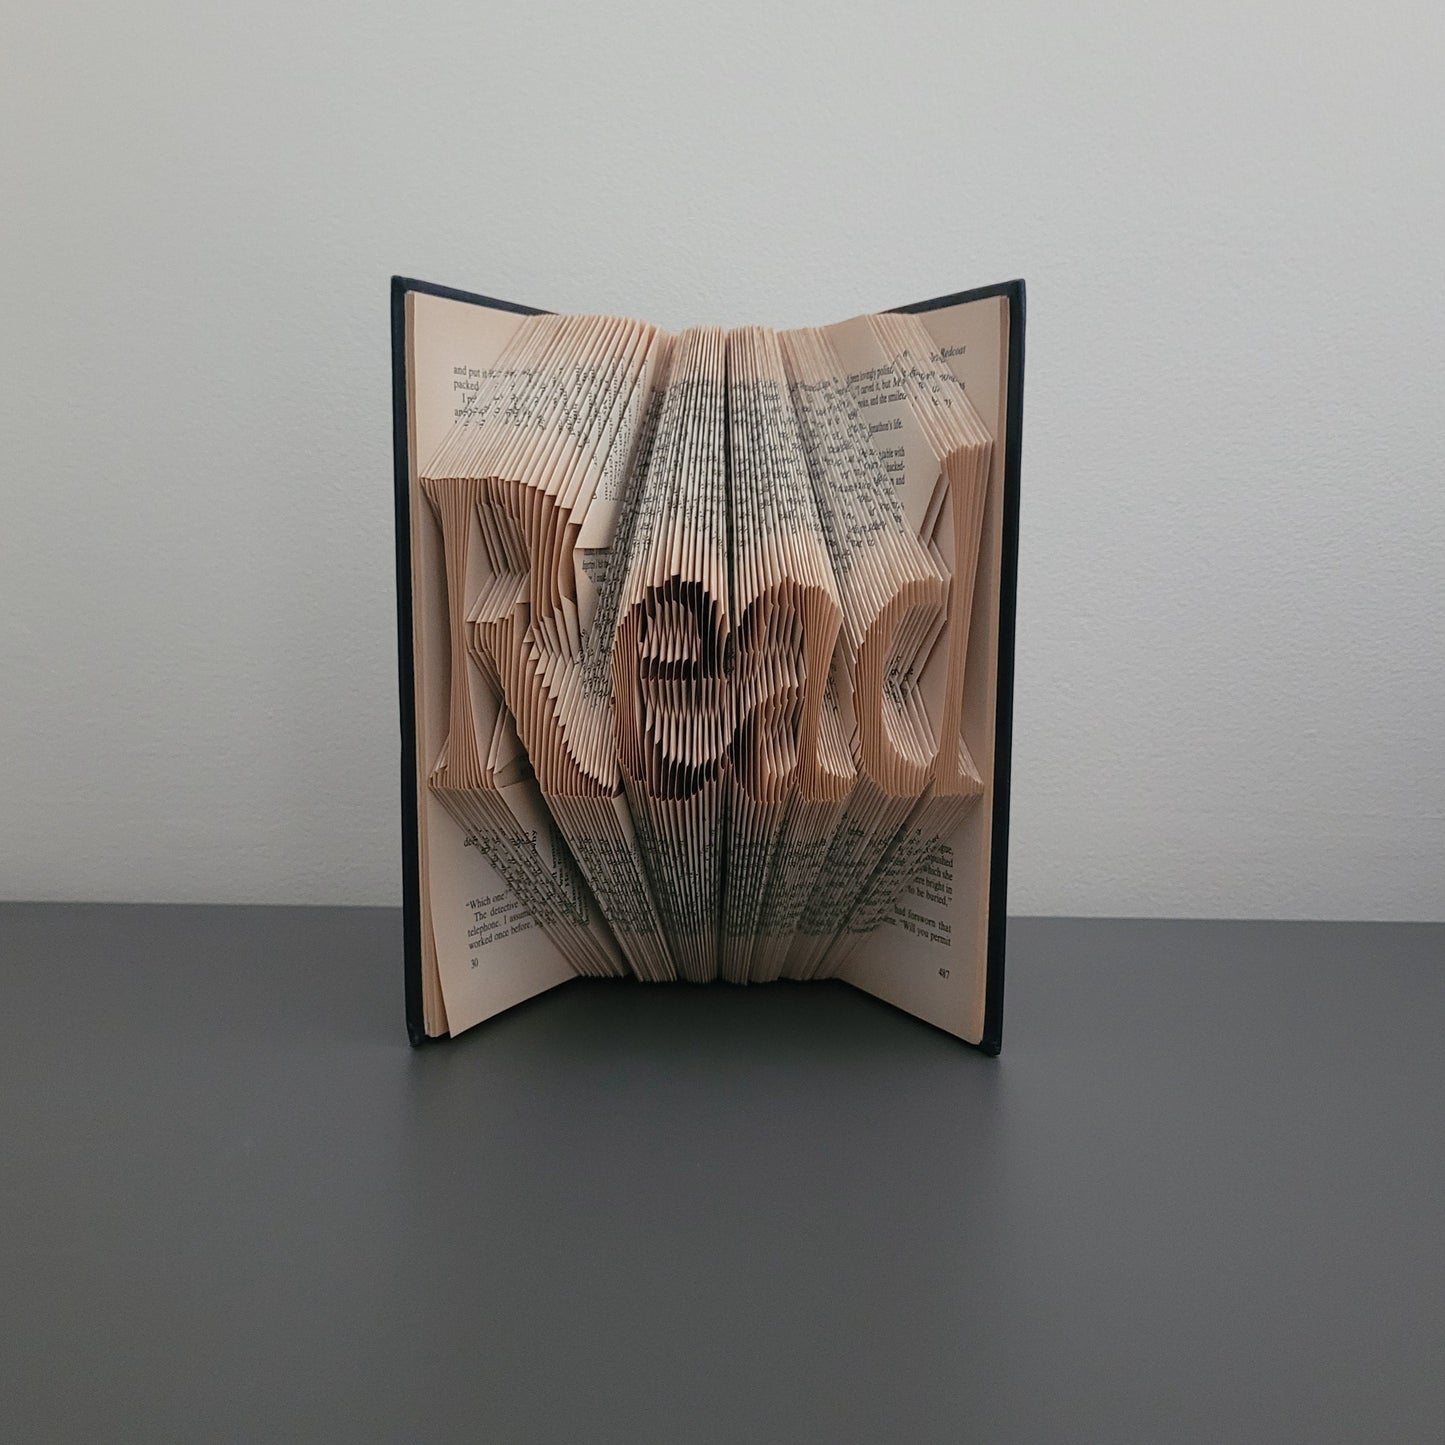 A book fold with the word "Read" on the front